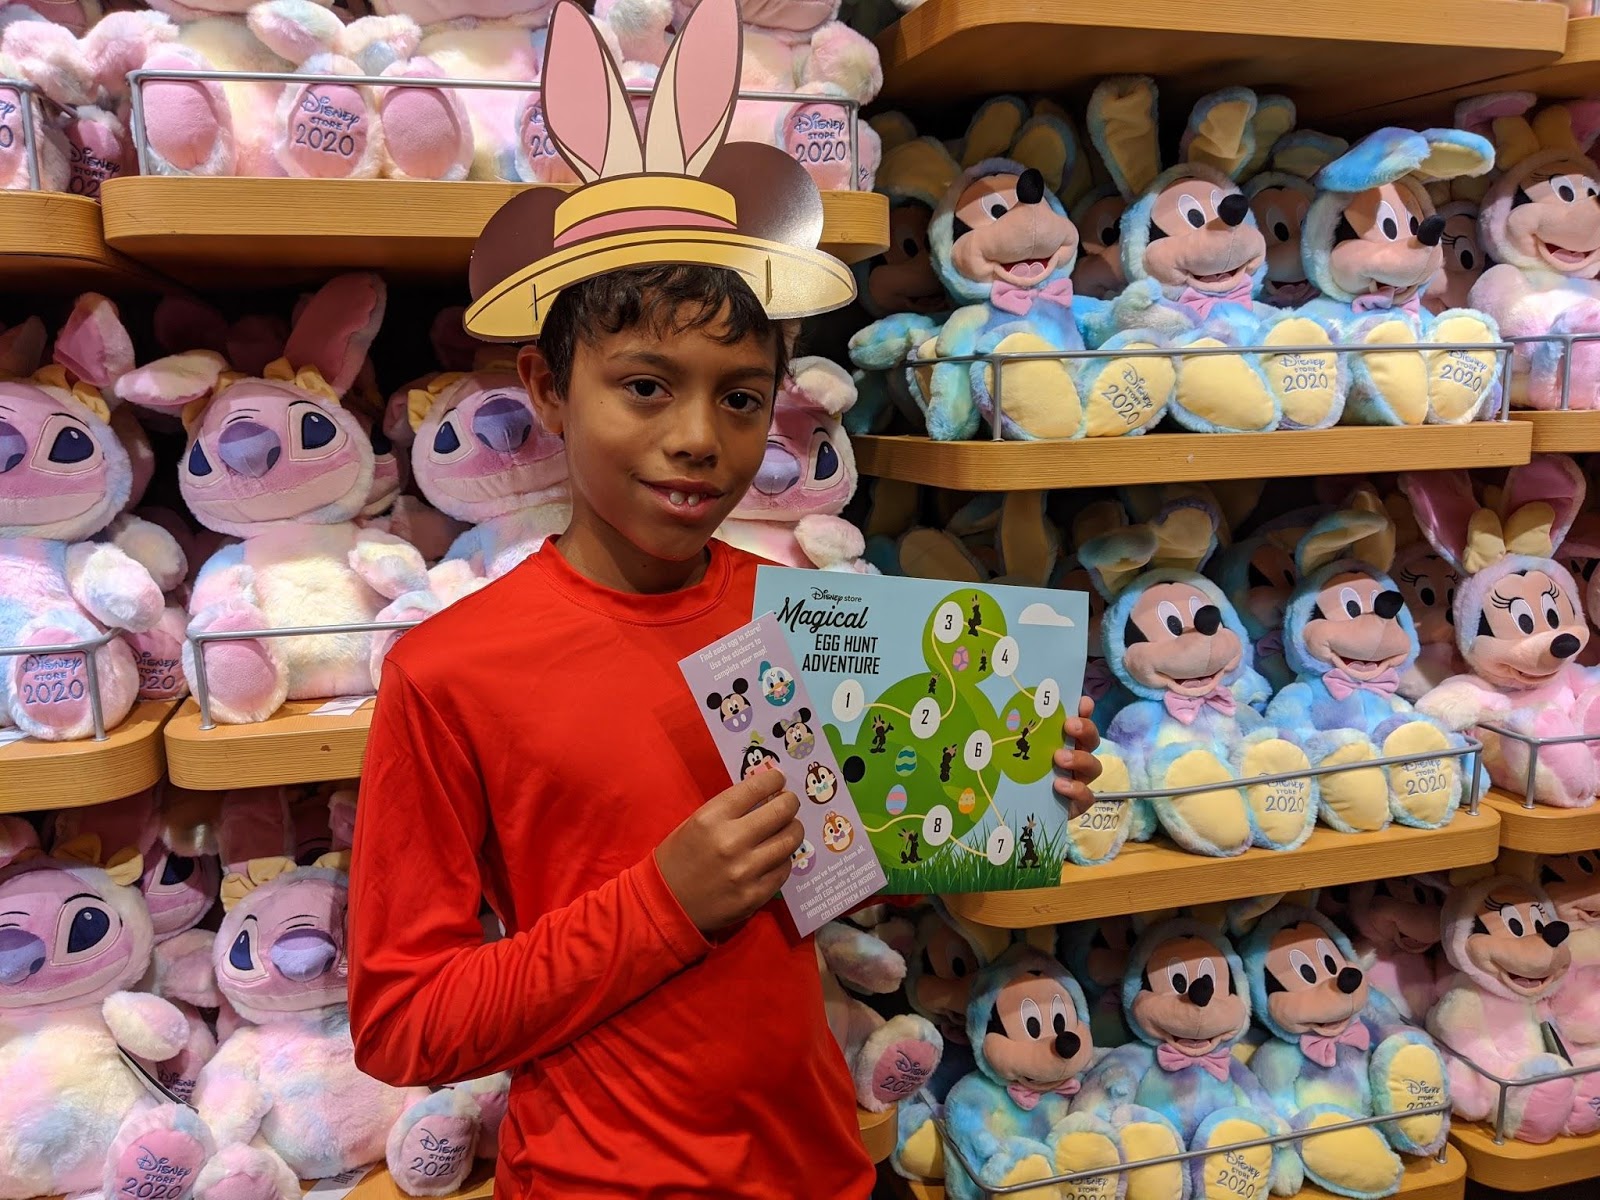 Previewing The 2020 Disney Store Magical Egg Hunt Adventure